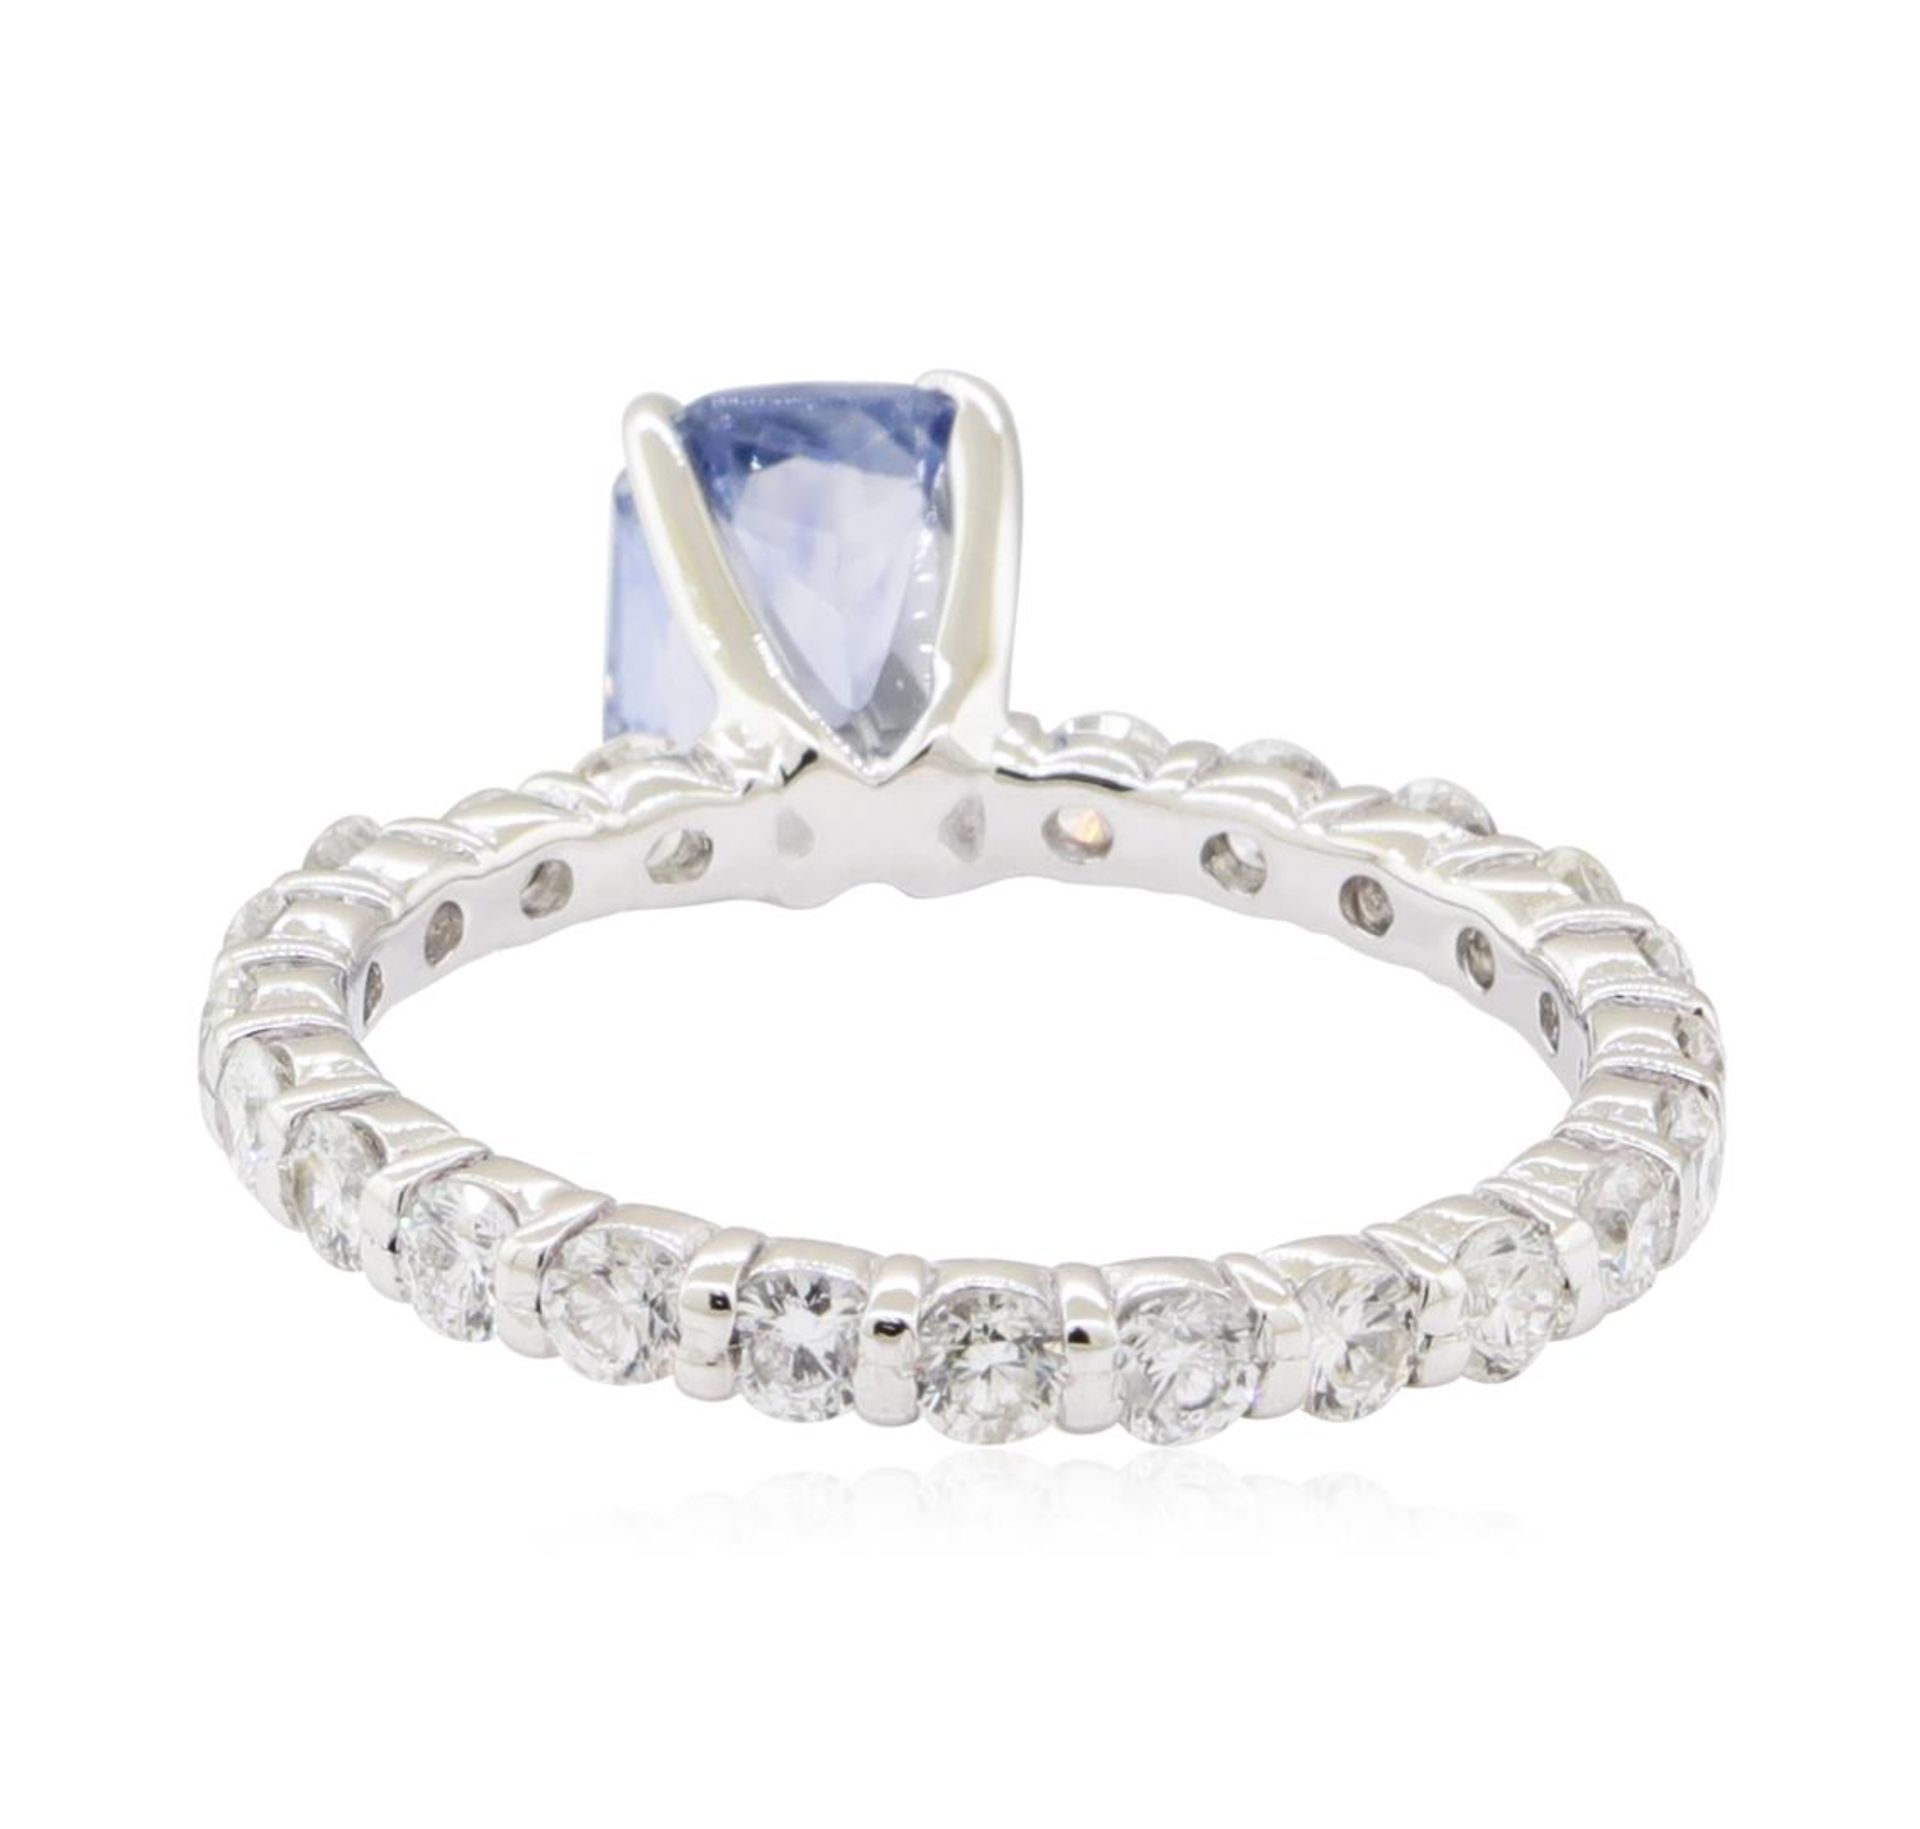 2.84 ctw Sapphire and Diamond Ring - 14KT White Gold - Image 3 of 5